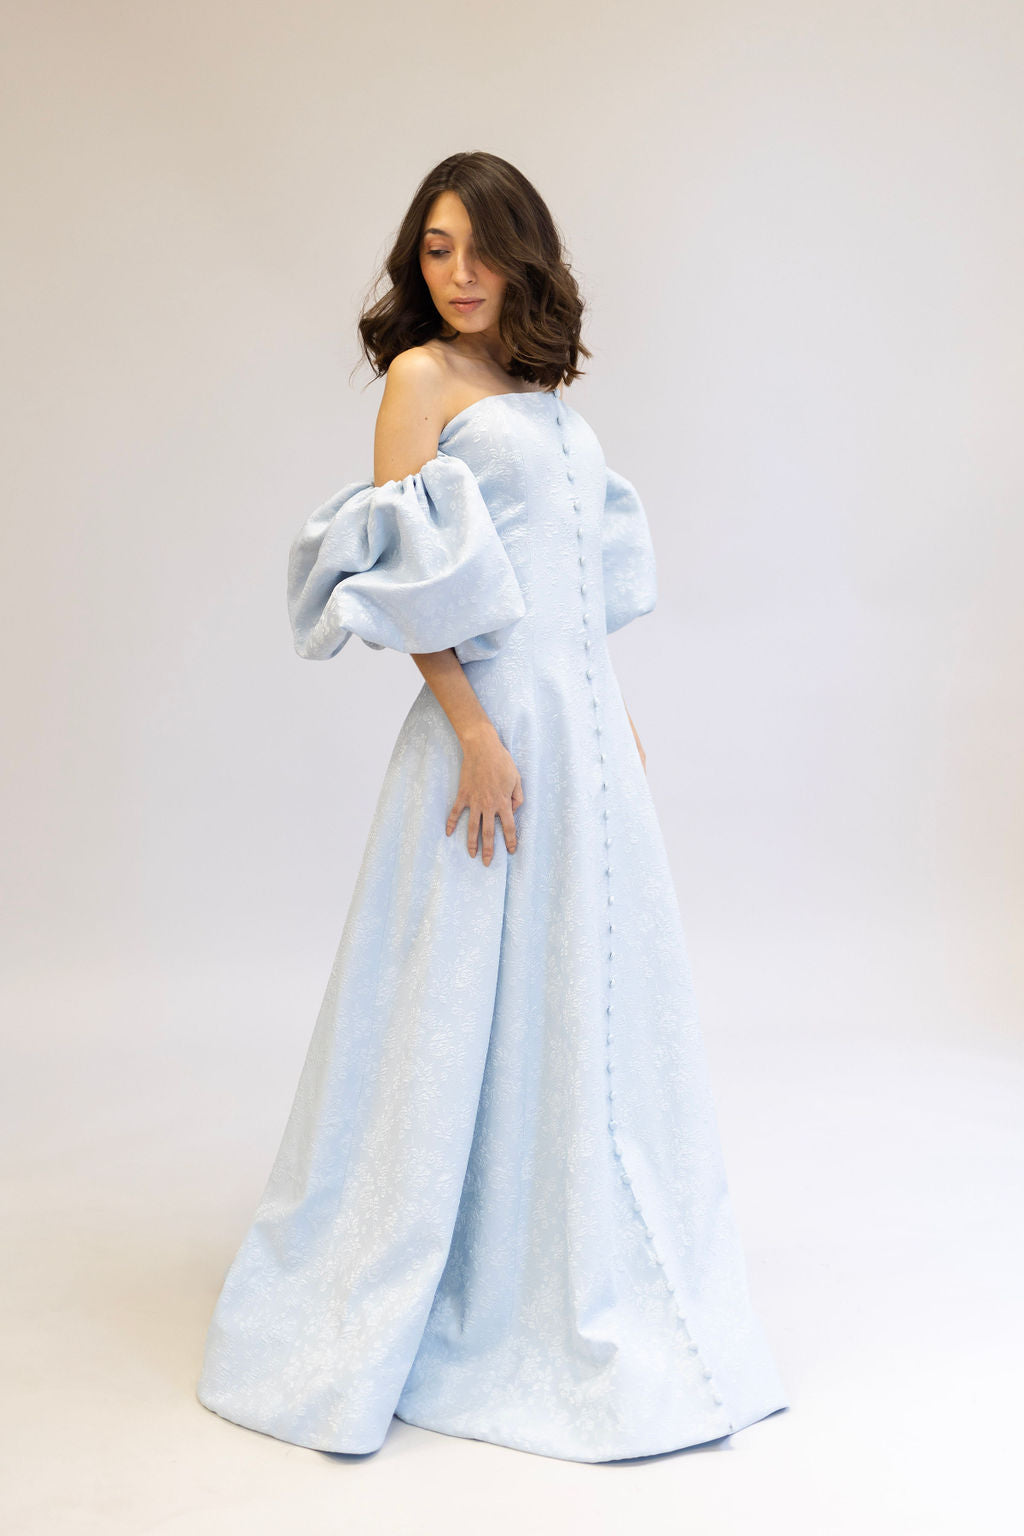 CLASSIC CUT BABY BLUE GOWN WITH PUFFY SLEEVES